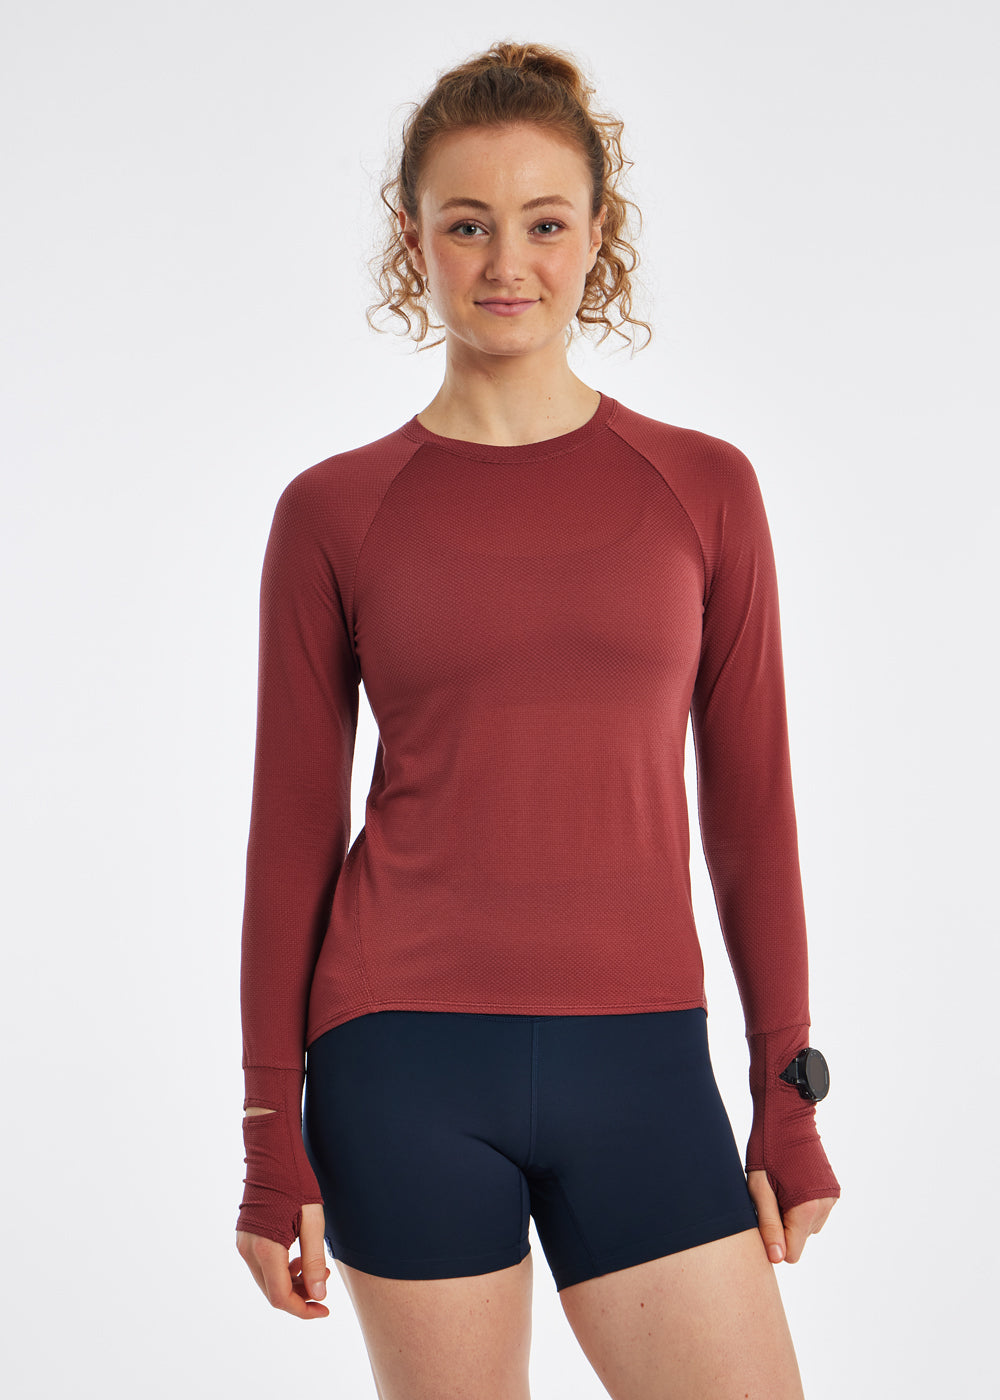 Athletic Top Long Sleeve Crewneck By Lululemon Size: 10 – Clothes